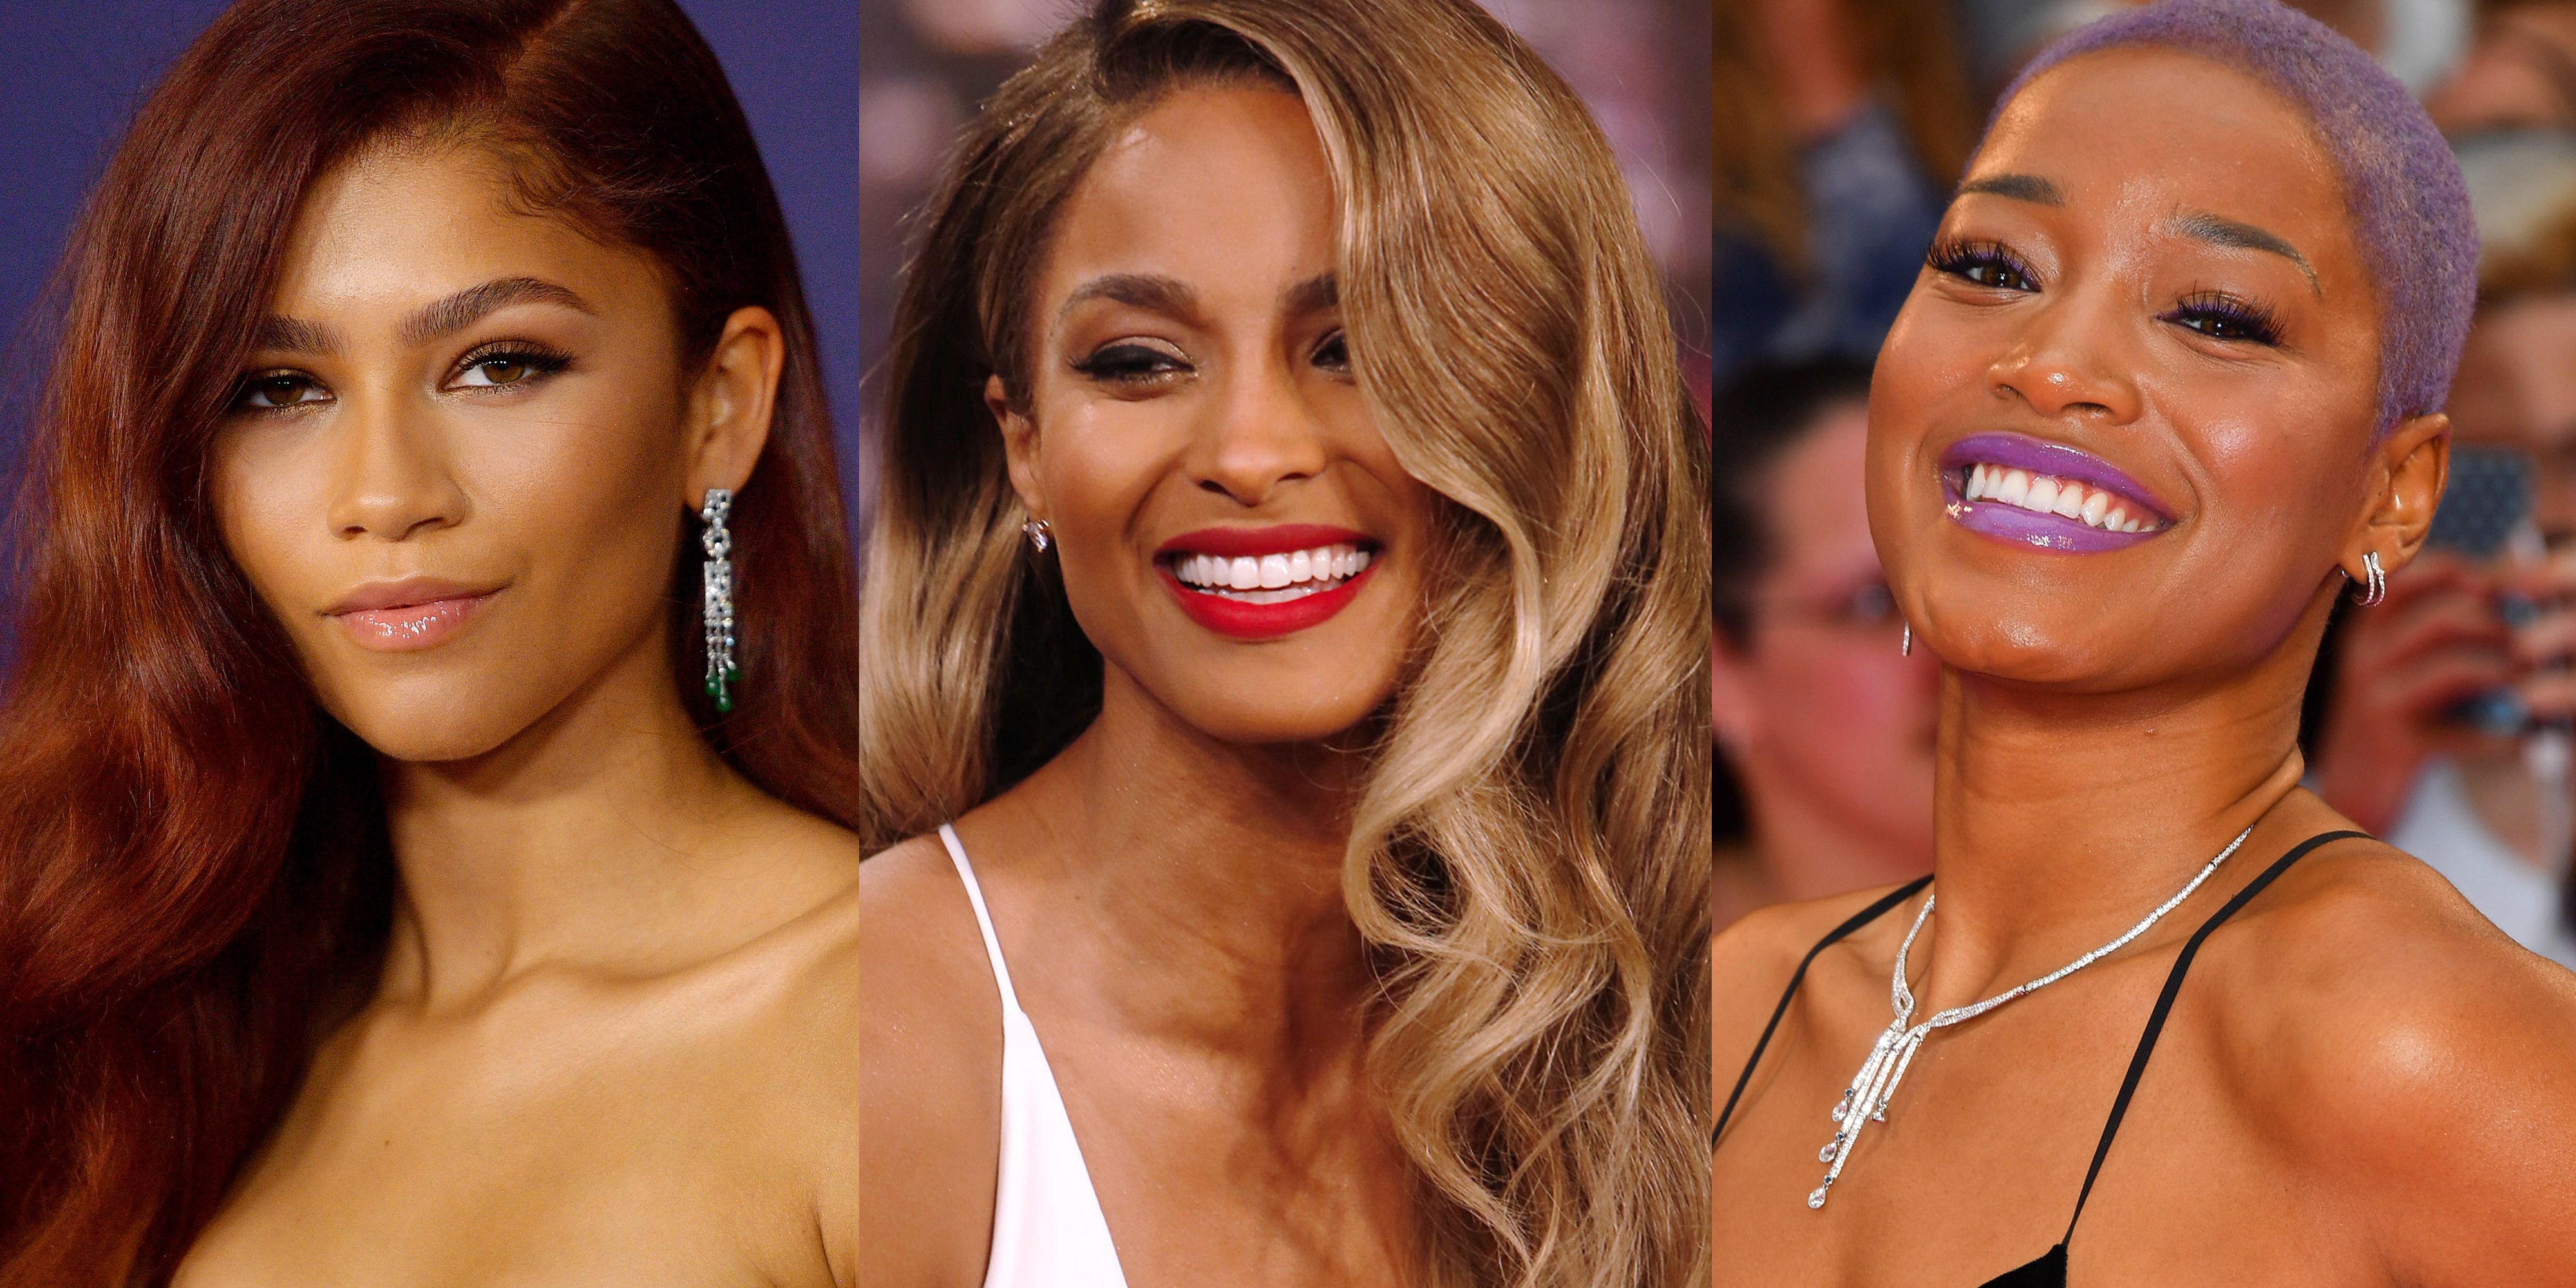 12 Best Hair Colors For Dark Skin Tones According To Stylists